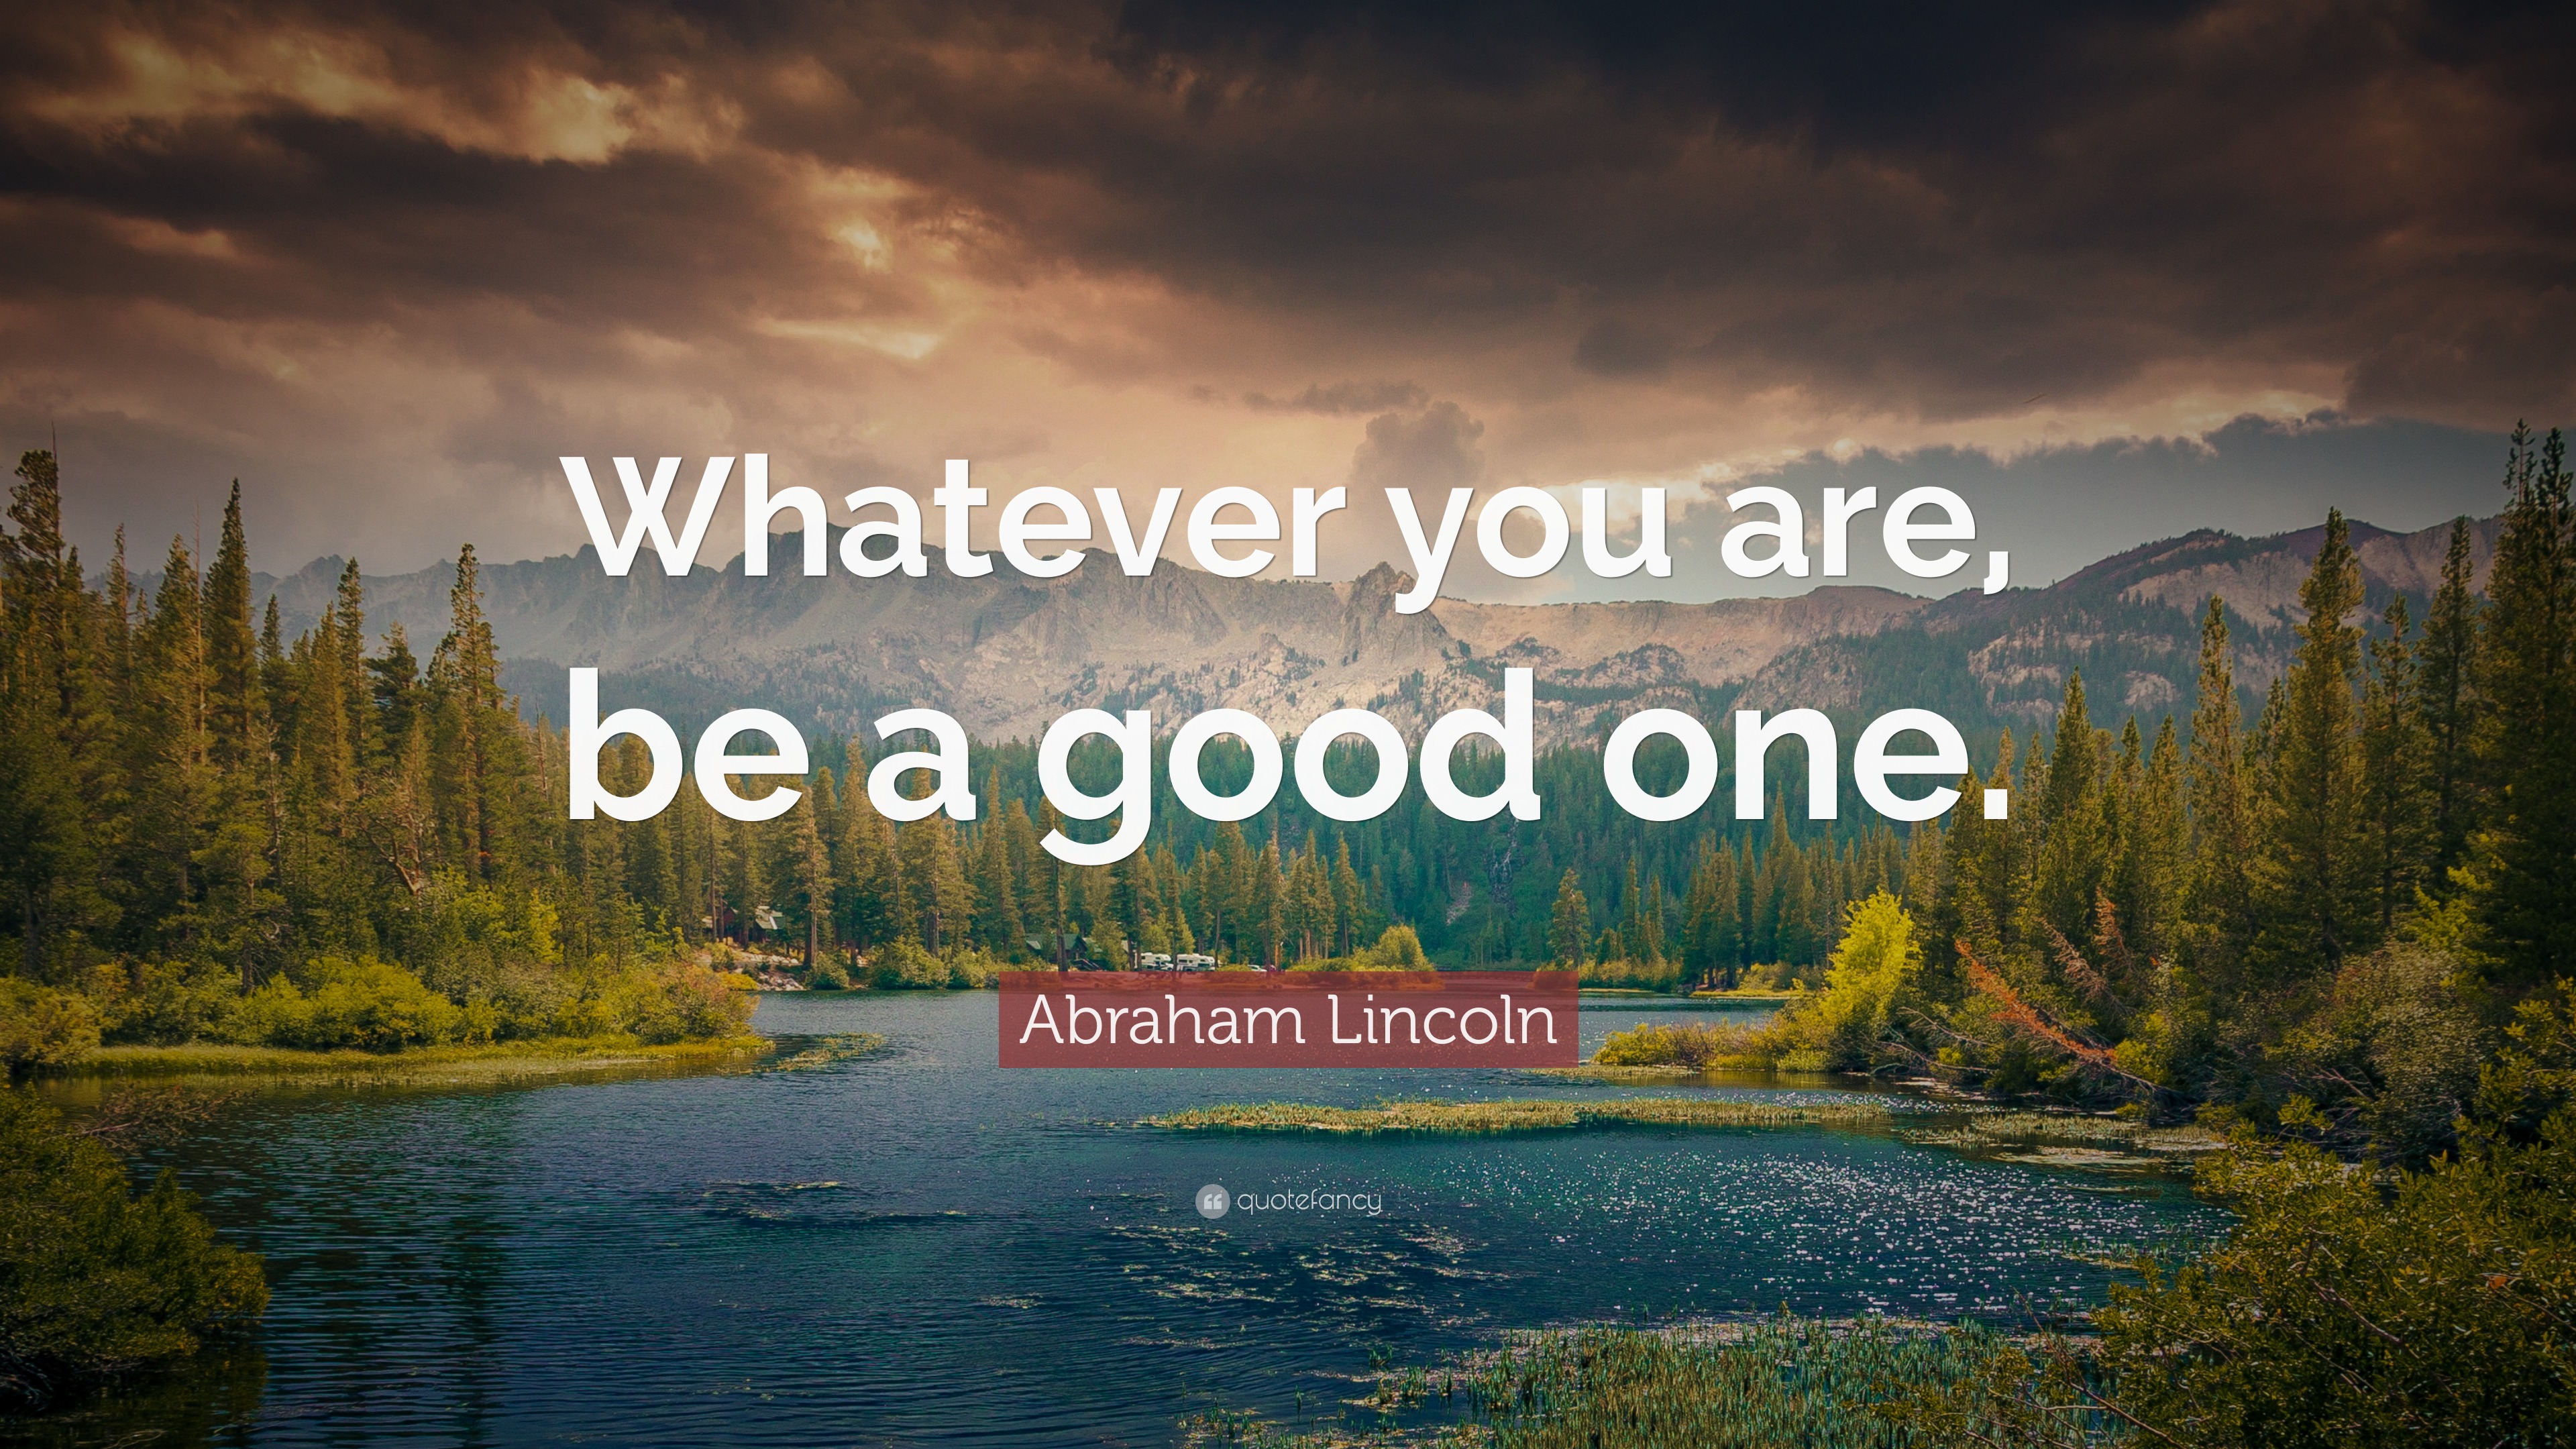 Abraham Lincoln Quote: "Whatever you are, be a good one ...